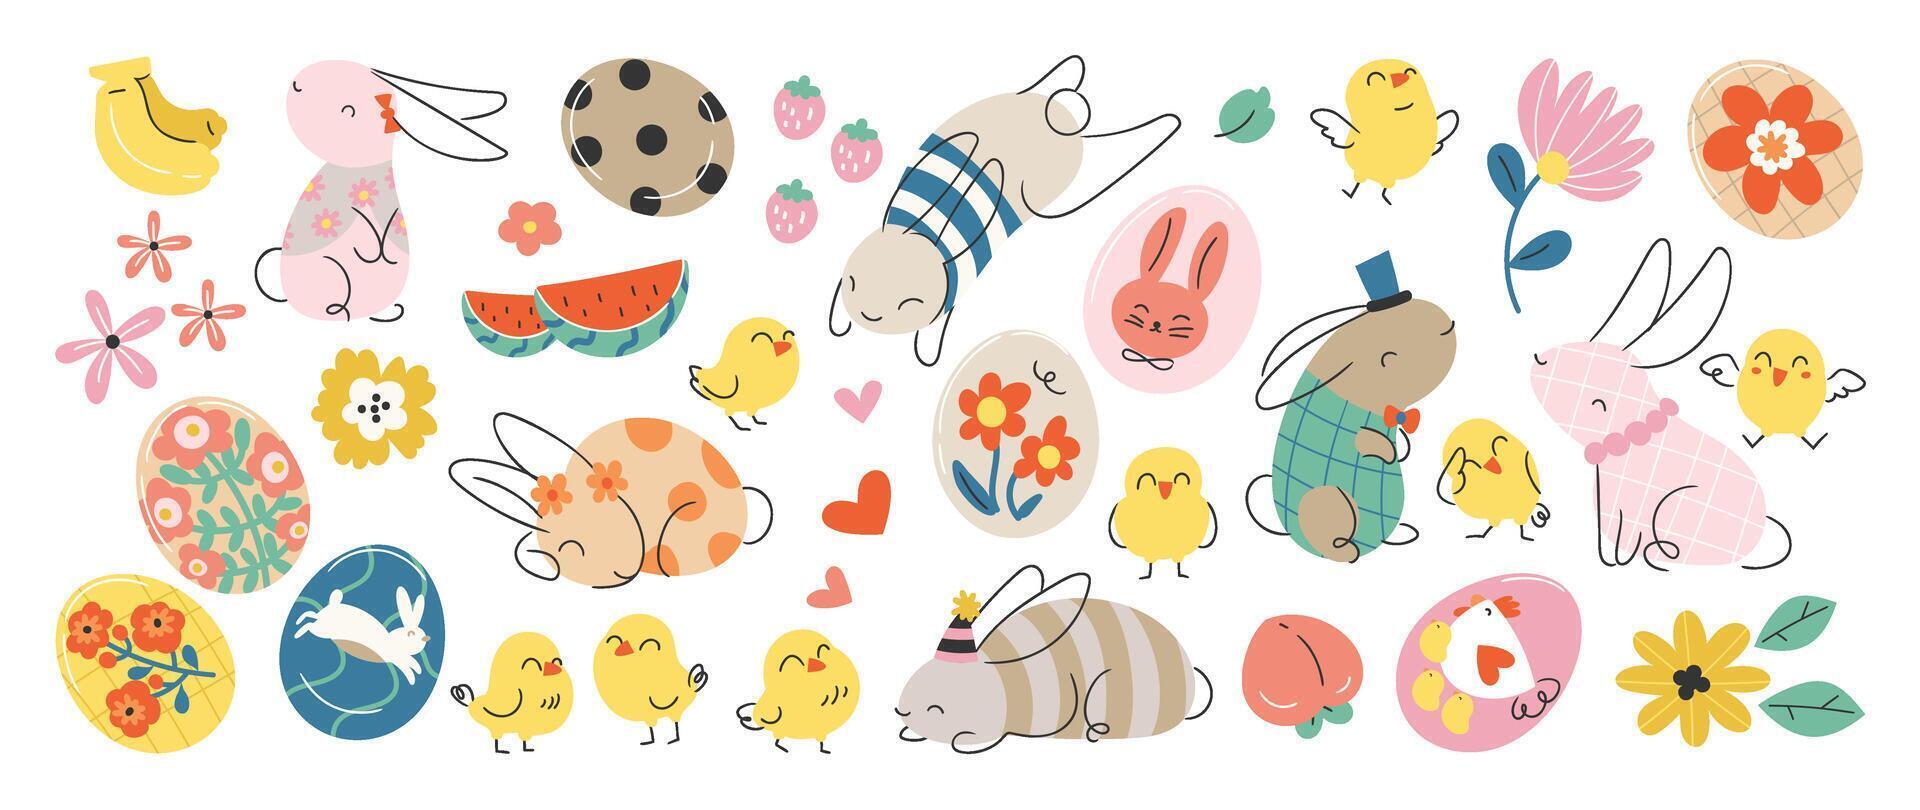 Happy Easter comic element vector set. Cute hand drawn rabbit, chicken, easter egg, spring flowers, watermelon slice. Collection of doodle animal and adorable design for decorative, card, kids.